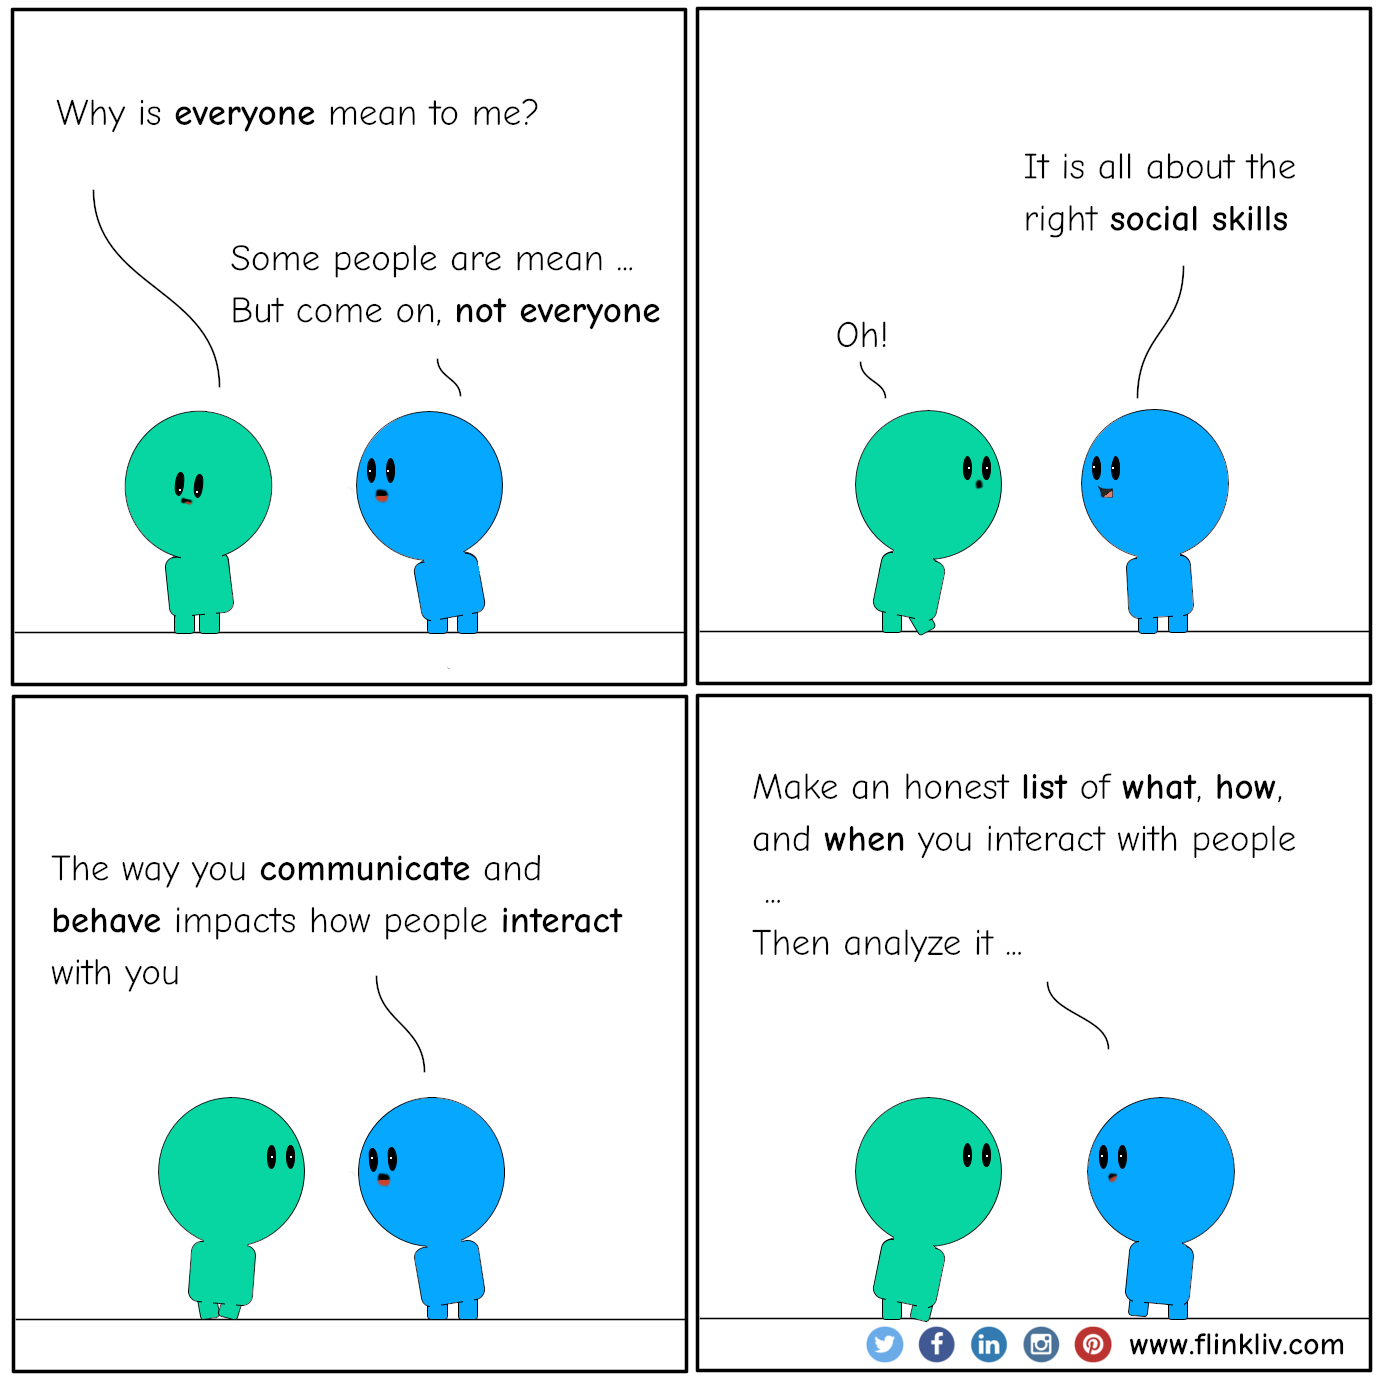 Conversation between A and B about Social skills.
              A: Why is everyone mean to me?
B: Some people are mean, but come on, not everyone 

B: It is all about the right social skills
A: Oh!
 

B: The way you communicate and behave impacts how people interact with you

B: Make an honest list of what, how, and when you interact with people, then analyze it


              